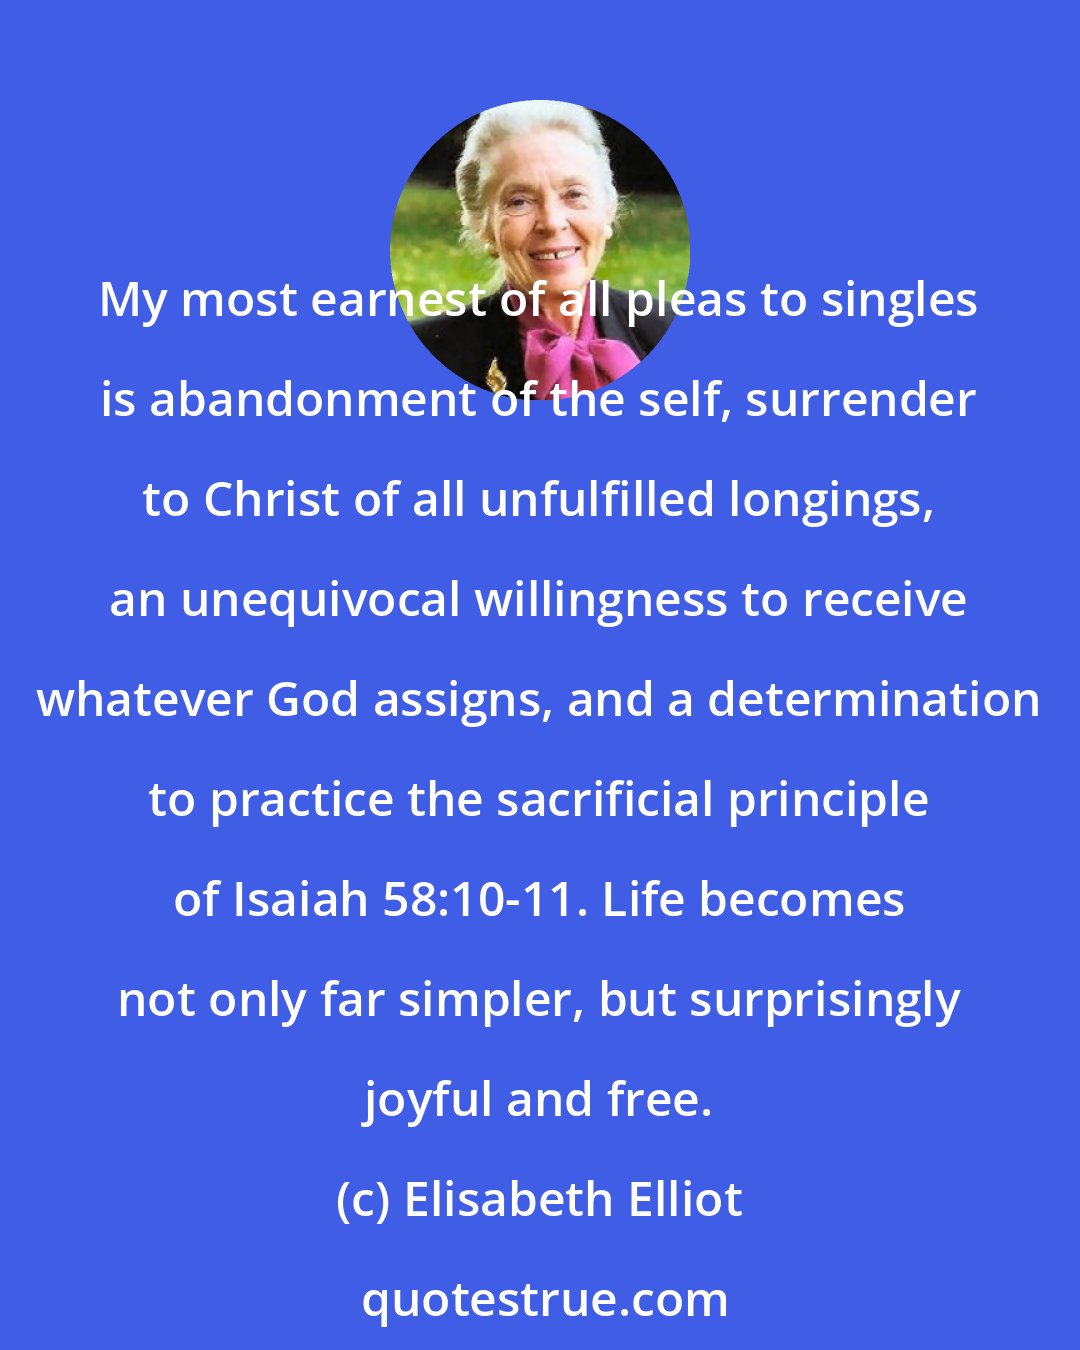 Elisabeth Elliot: My most earnest of all pleas to singles is abandonment of the self, surrender to Christ of all unfulfilled longings, an unequivocal willingness to receive whatever God assigns, and a determination to practice the sacrificial principle of Isaiah 58:10-11. Life becomes not only far simpler, but surprisingly joyful and free.